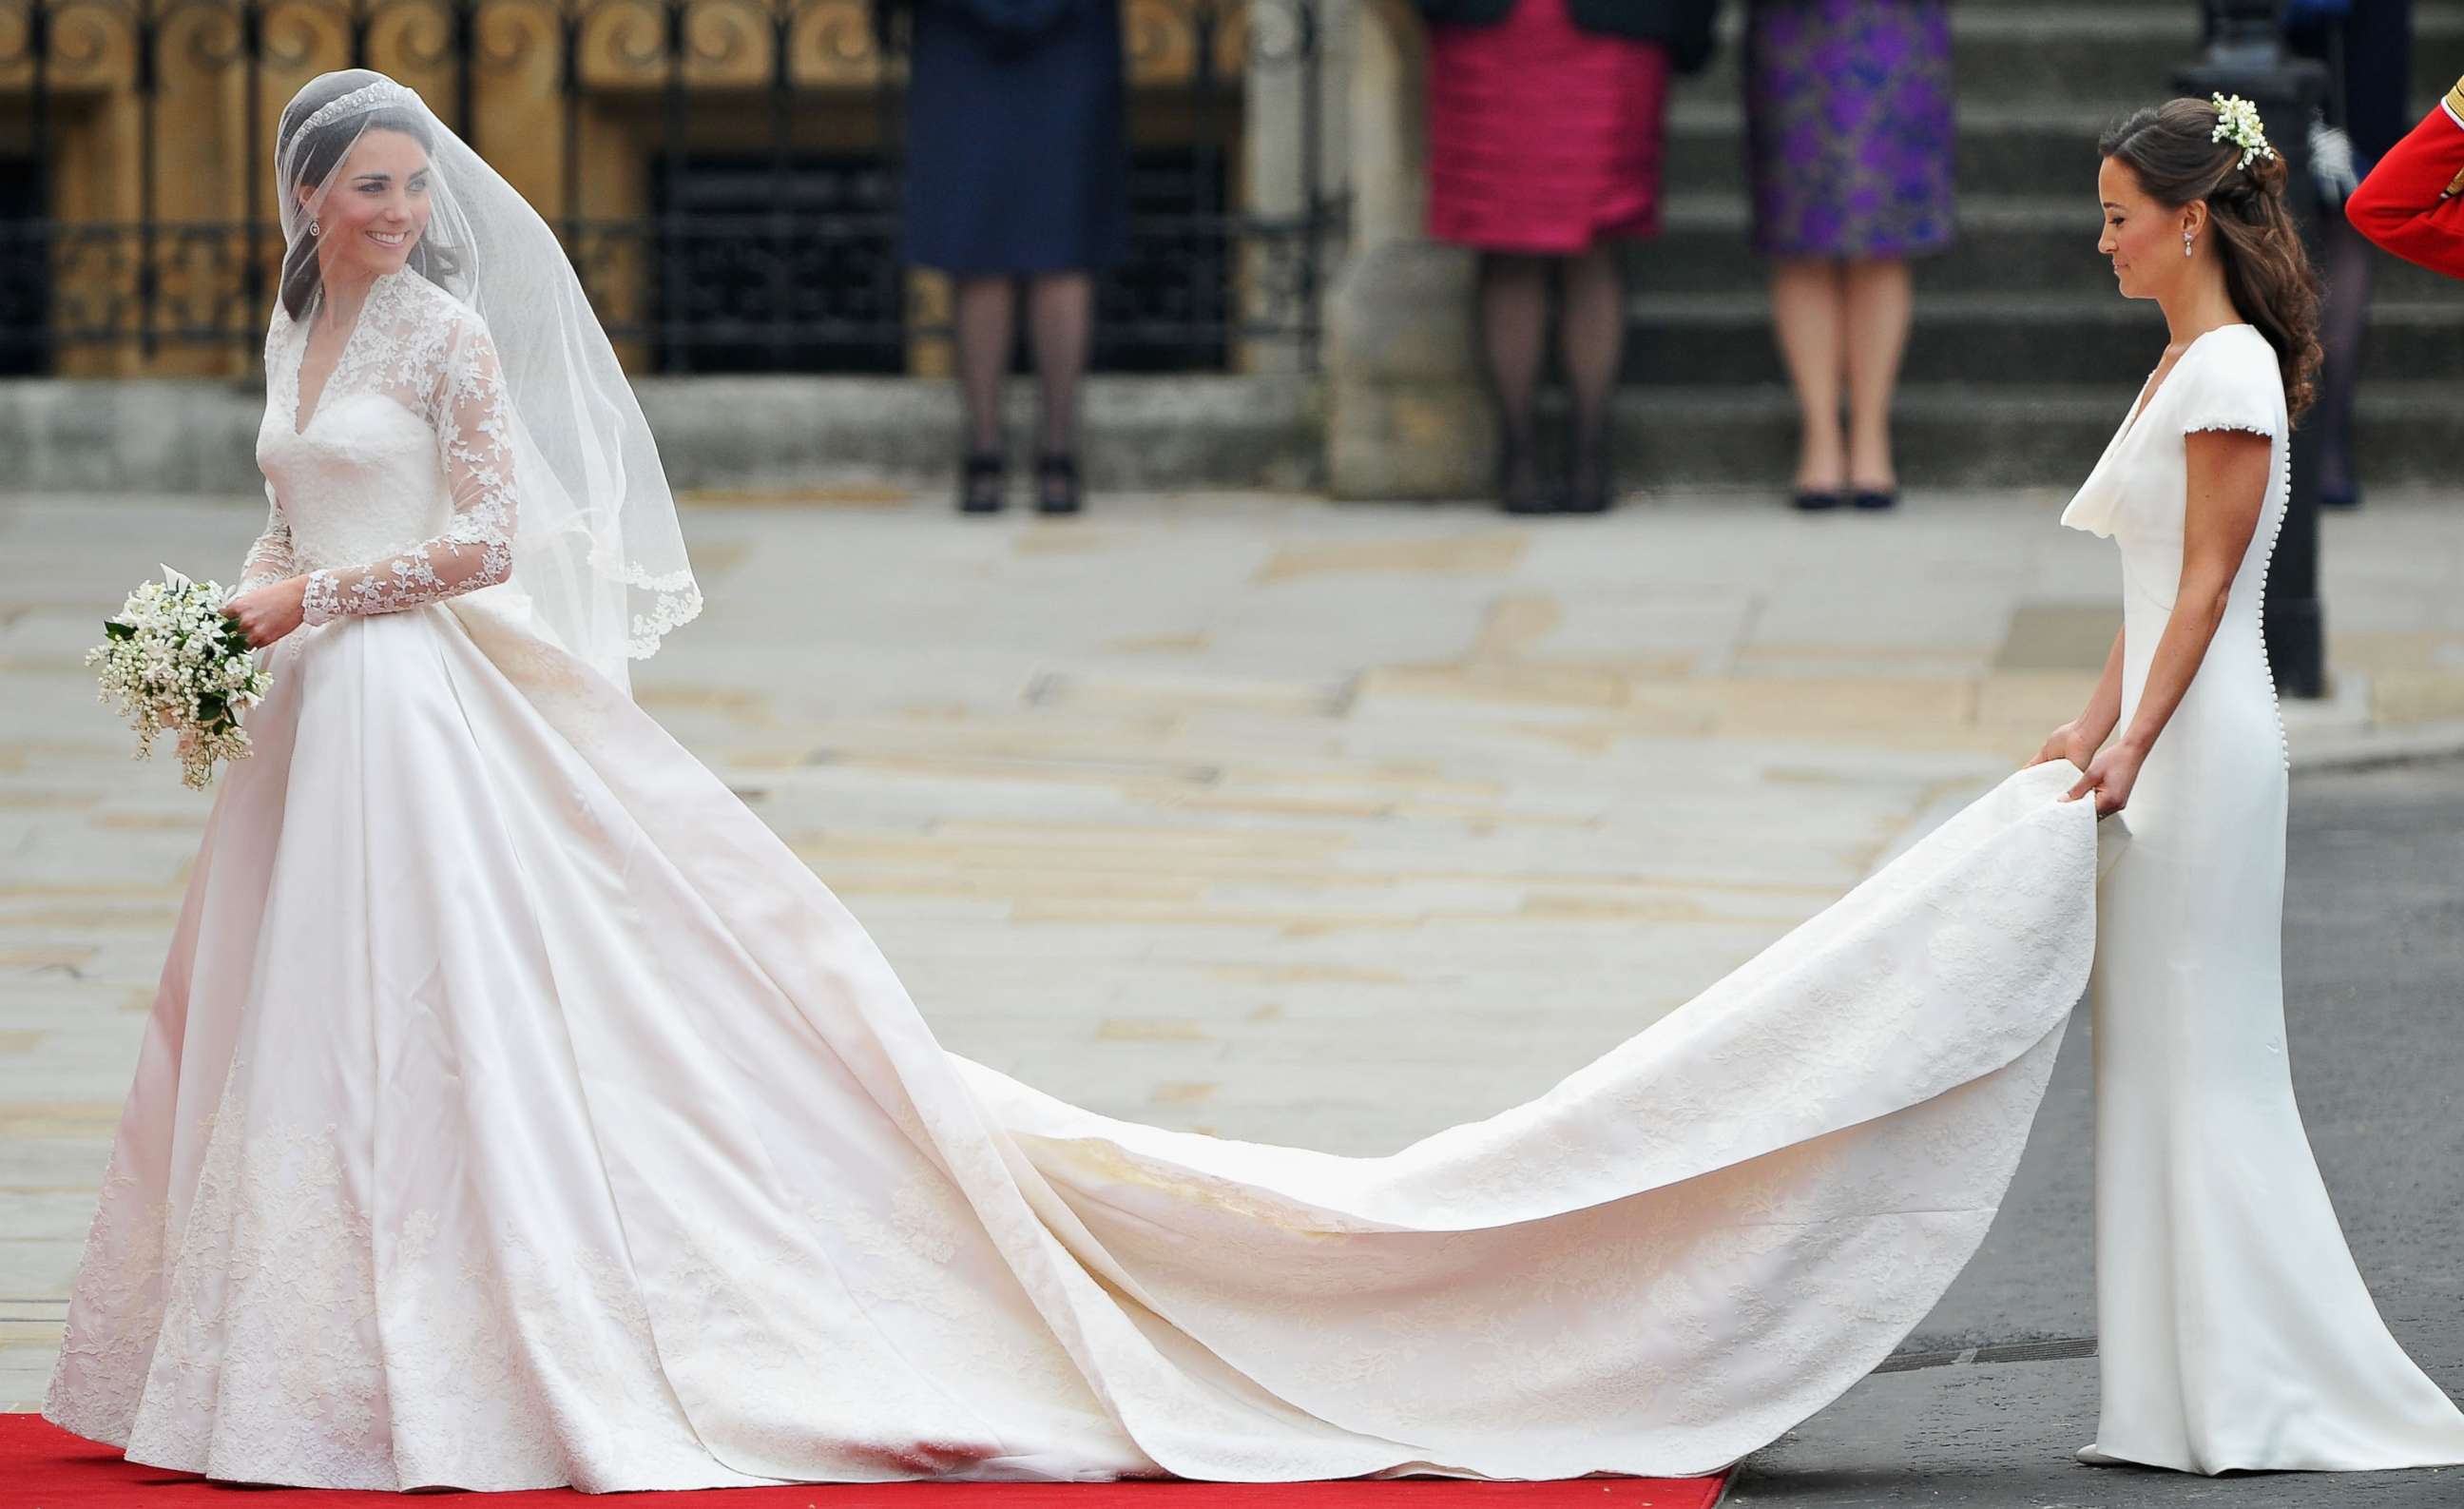 PHOTO: Catherine Middleton waves to the crowds as her sister and Maid of Honor Pippa Middleton holds her dress before walking in to the Abbey to attend the Royal Wedding of Prince William to Catherine Middleton at Westminster Abbey on April 29, 2011.